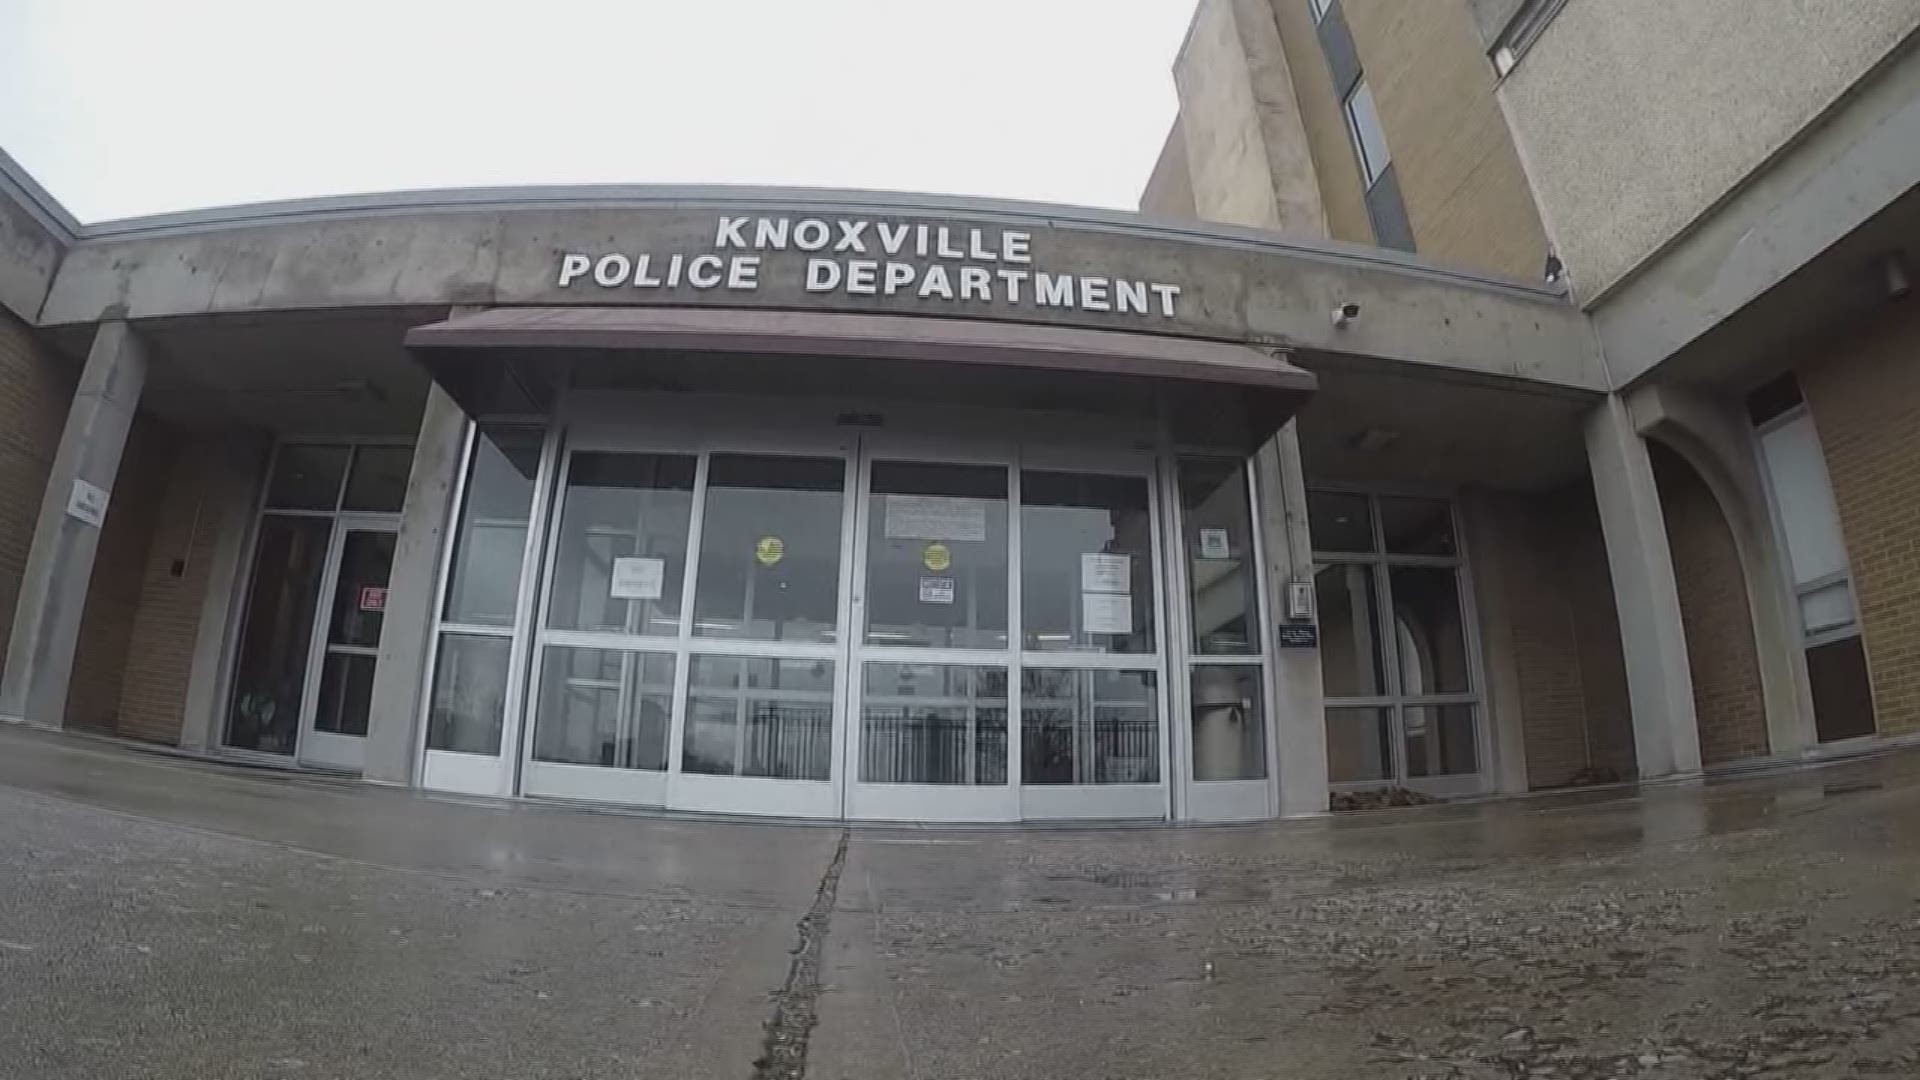 New developments today following a 10Investigates report. Knoxville's mayor and police chief are now planning to hold a press conference this afternoon. That's in light of an internal KPD investigation we first told you about last night.